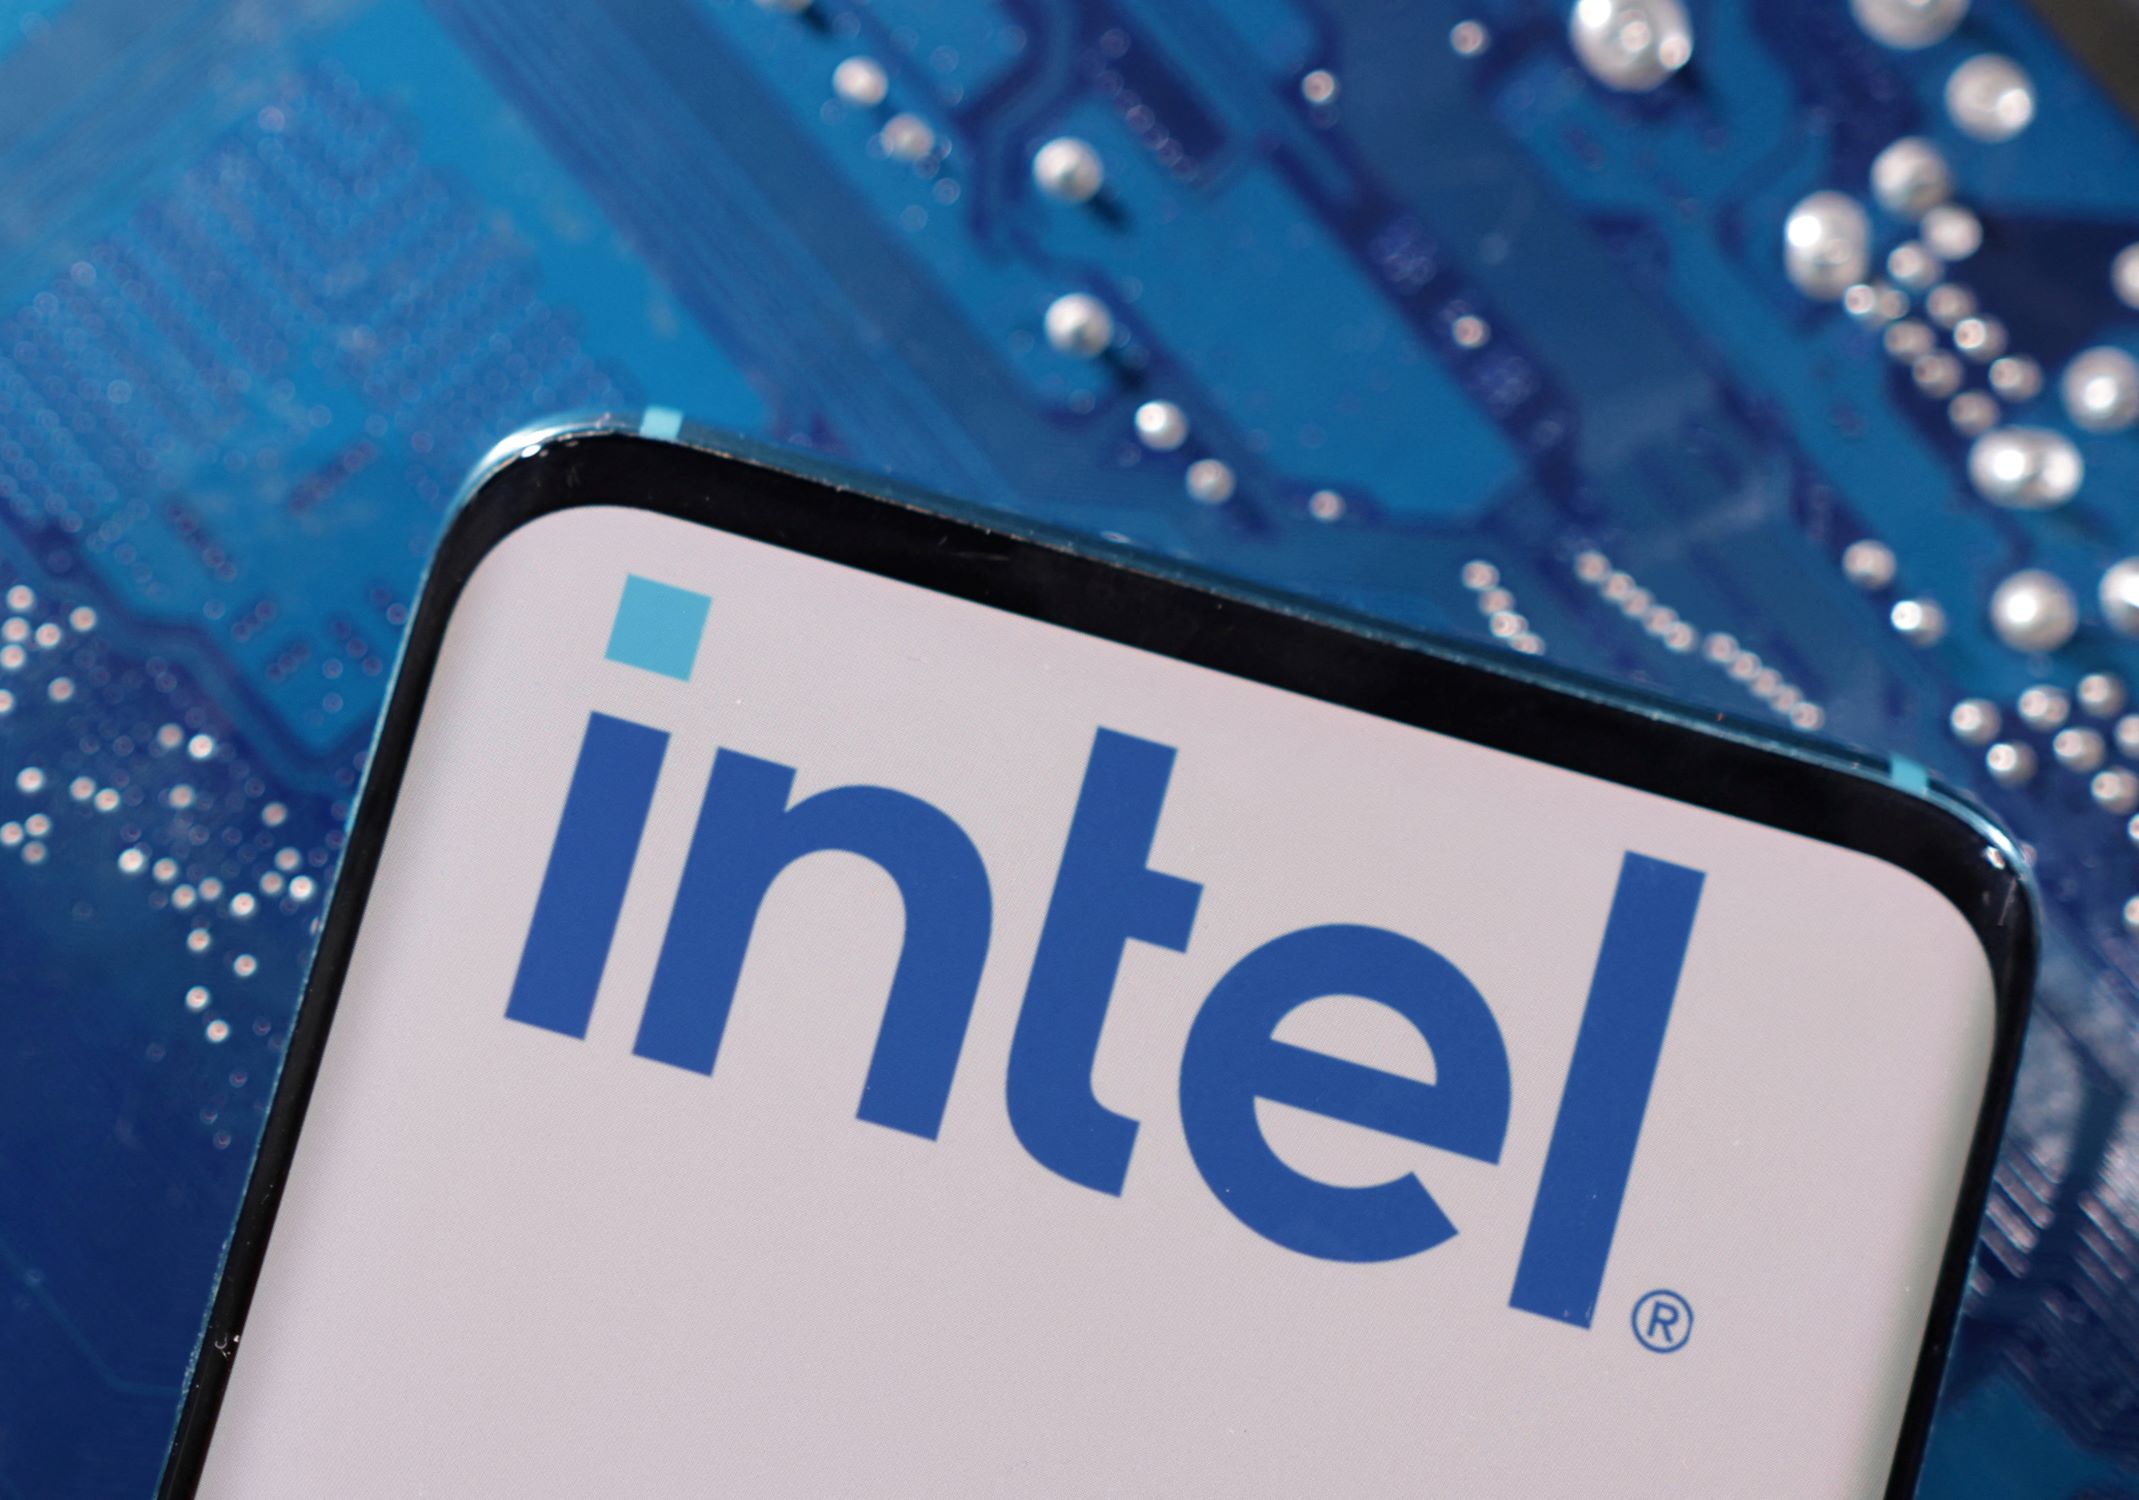 How Is Intel Using The Internet Of Things